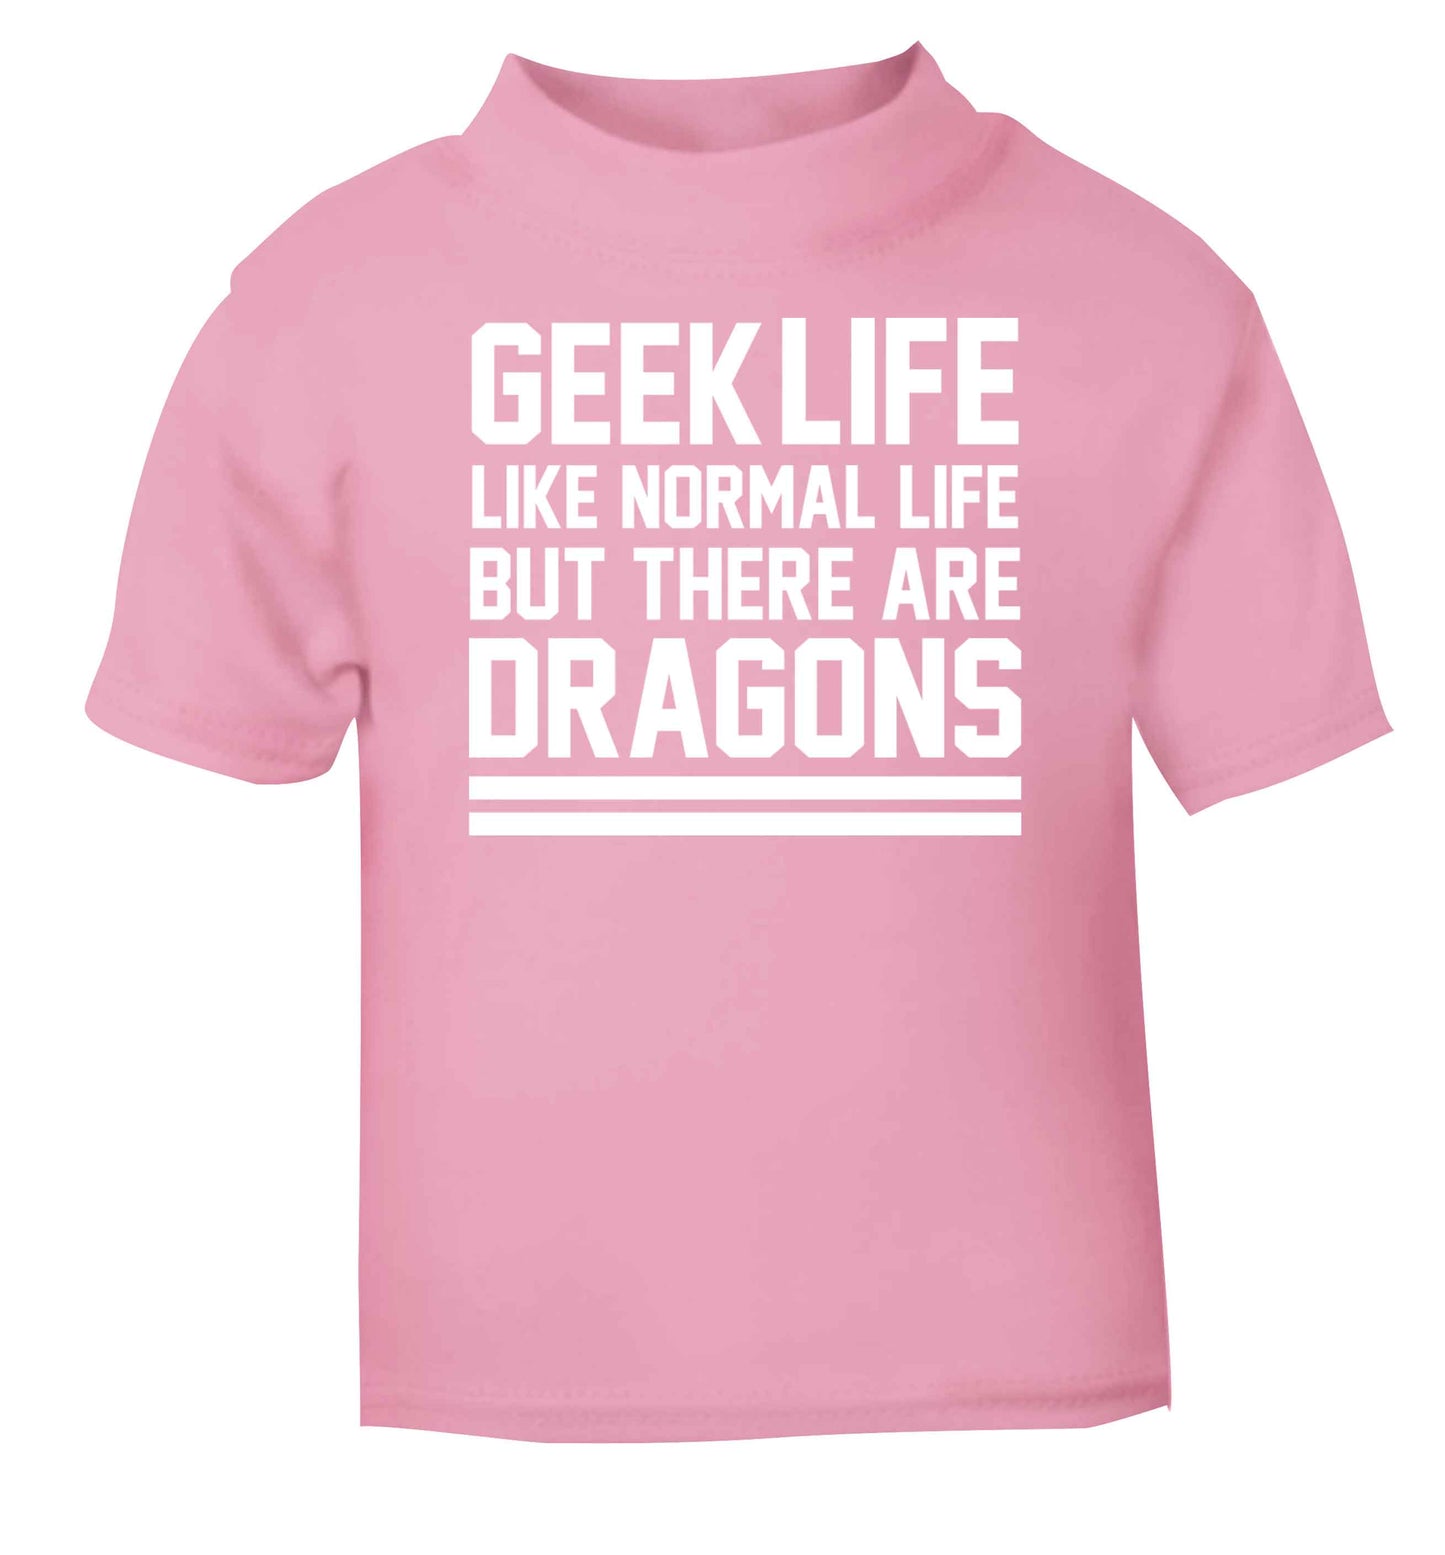 Geek life like normal life but there are dragons light pink baby toddler Tshirt 2 Years